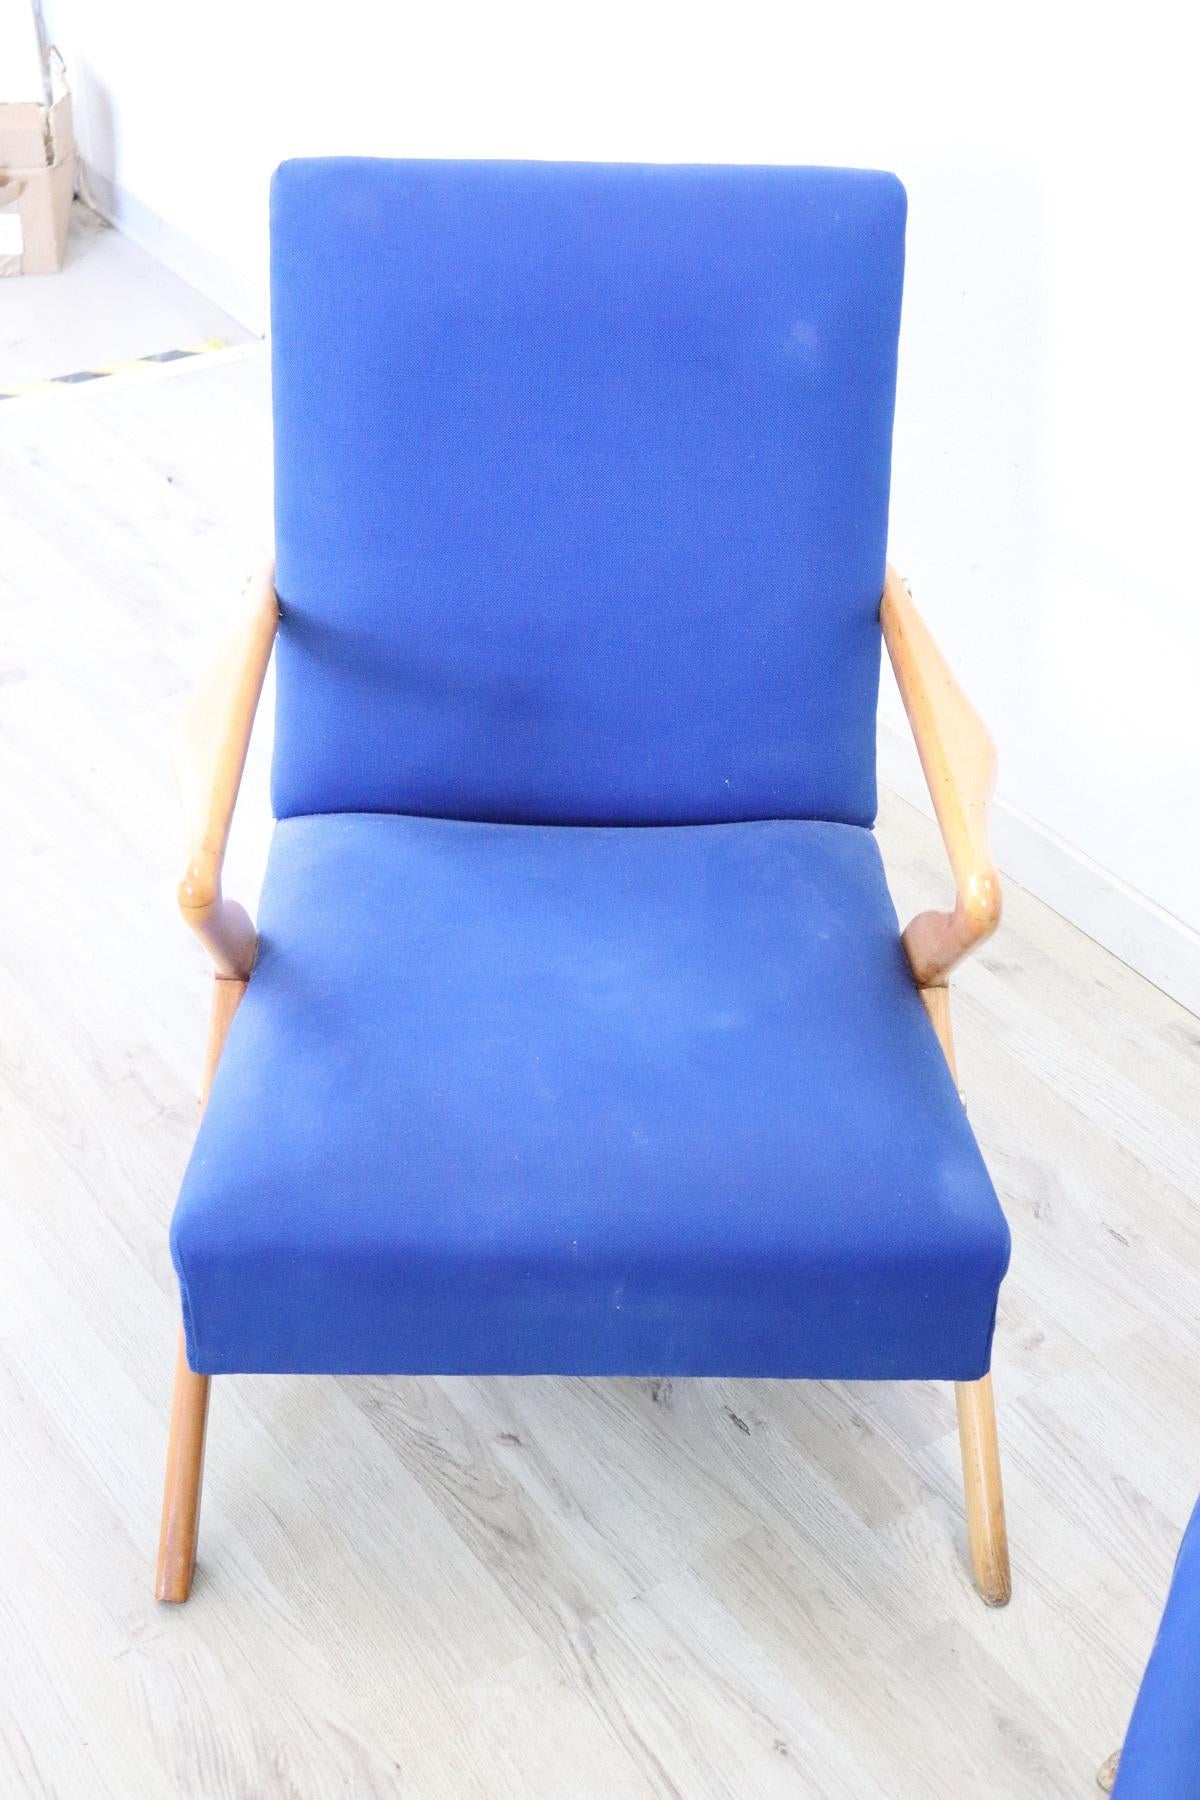 Beautiful and rare series of two Italian design armchairs from the 1950 designer Paolo Buffa. Made of beech wood fabric in blue color. True Italian design ! our design for sale is original and therefore shows traces of wear visible in the picture.